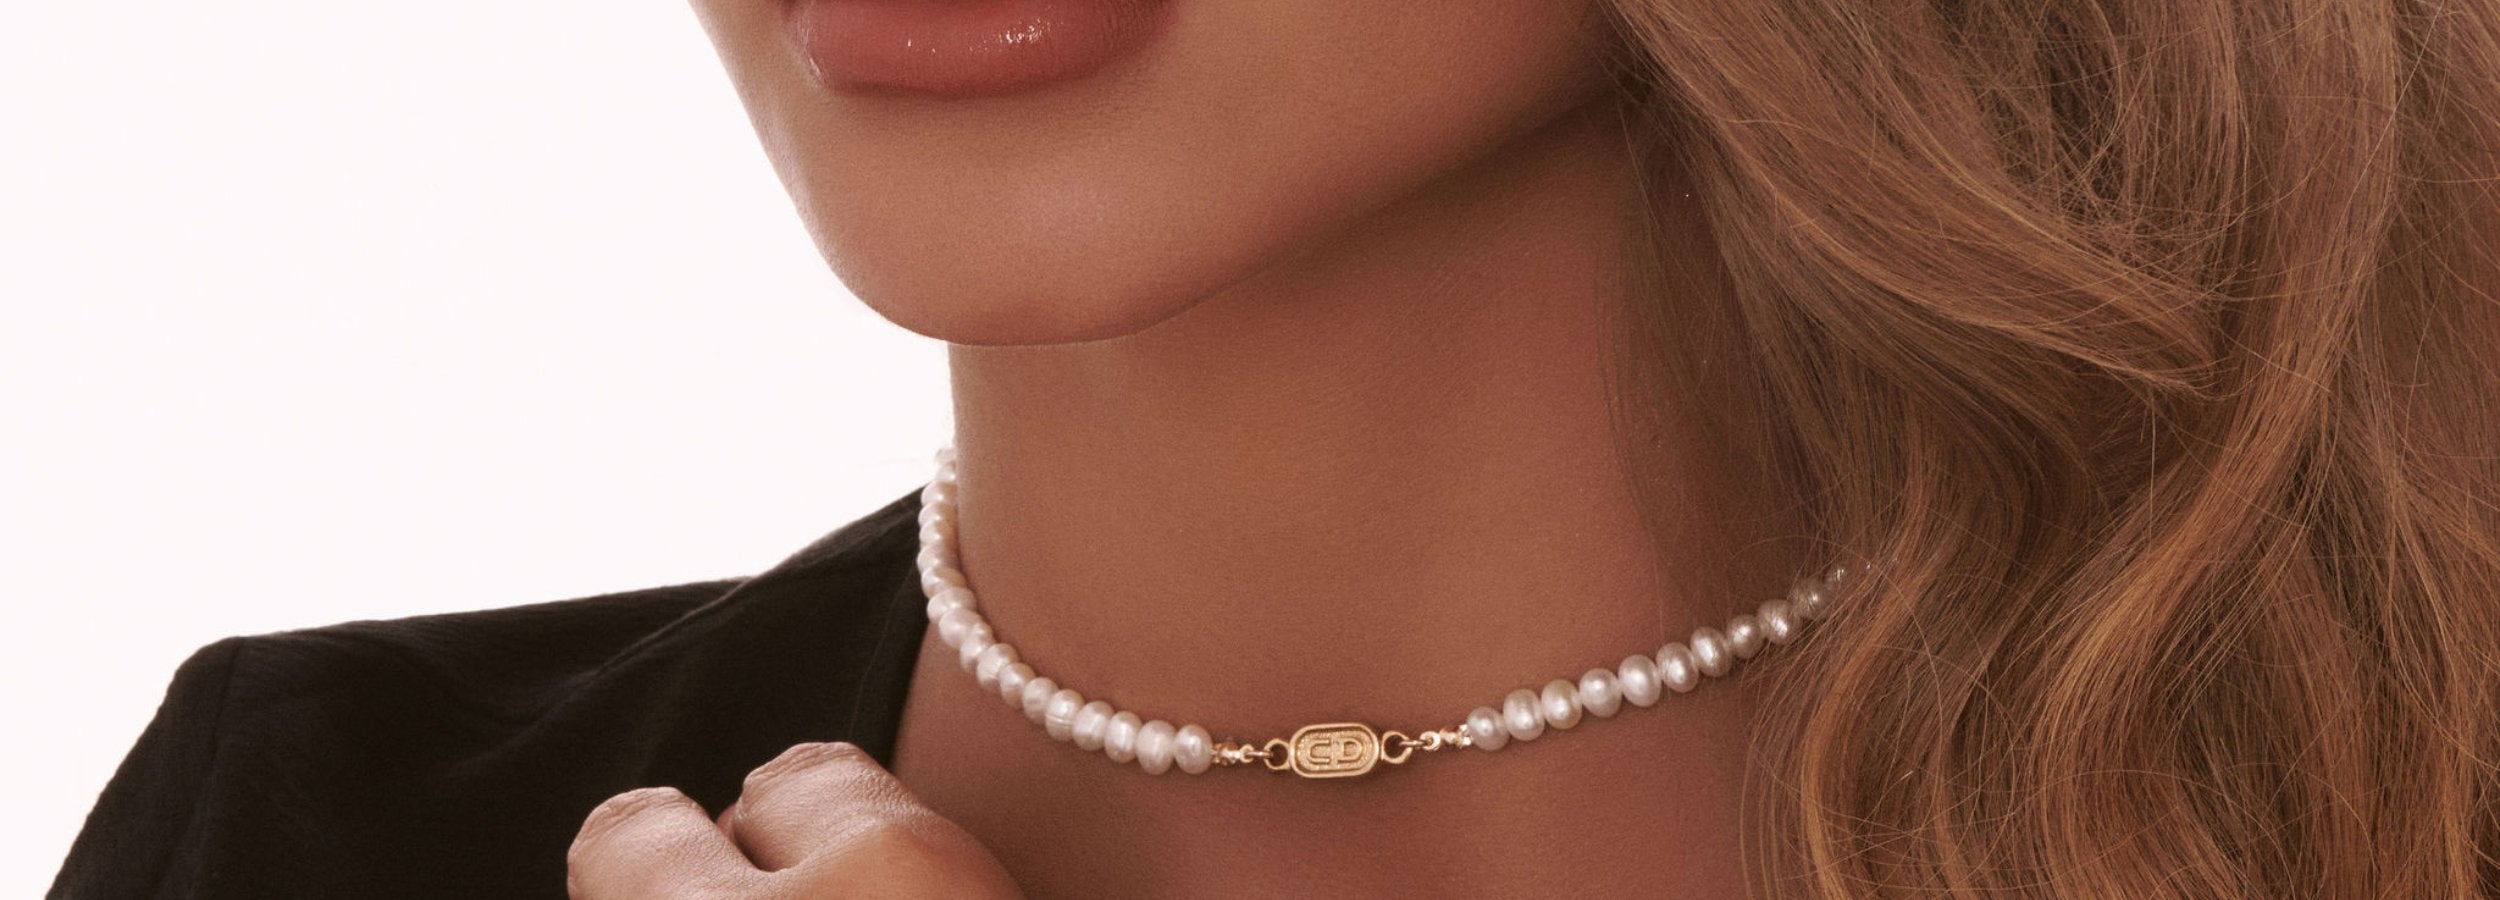 Petit CD Necklace Gold-Finish Metal and White Resin Pearls | DIOR